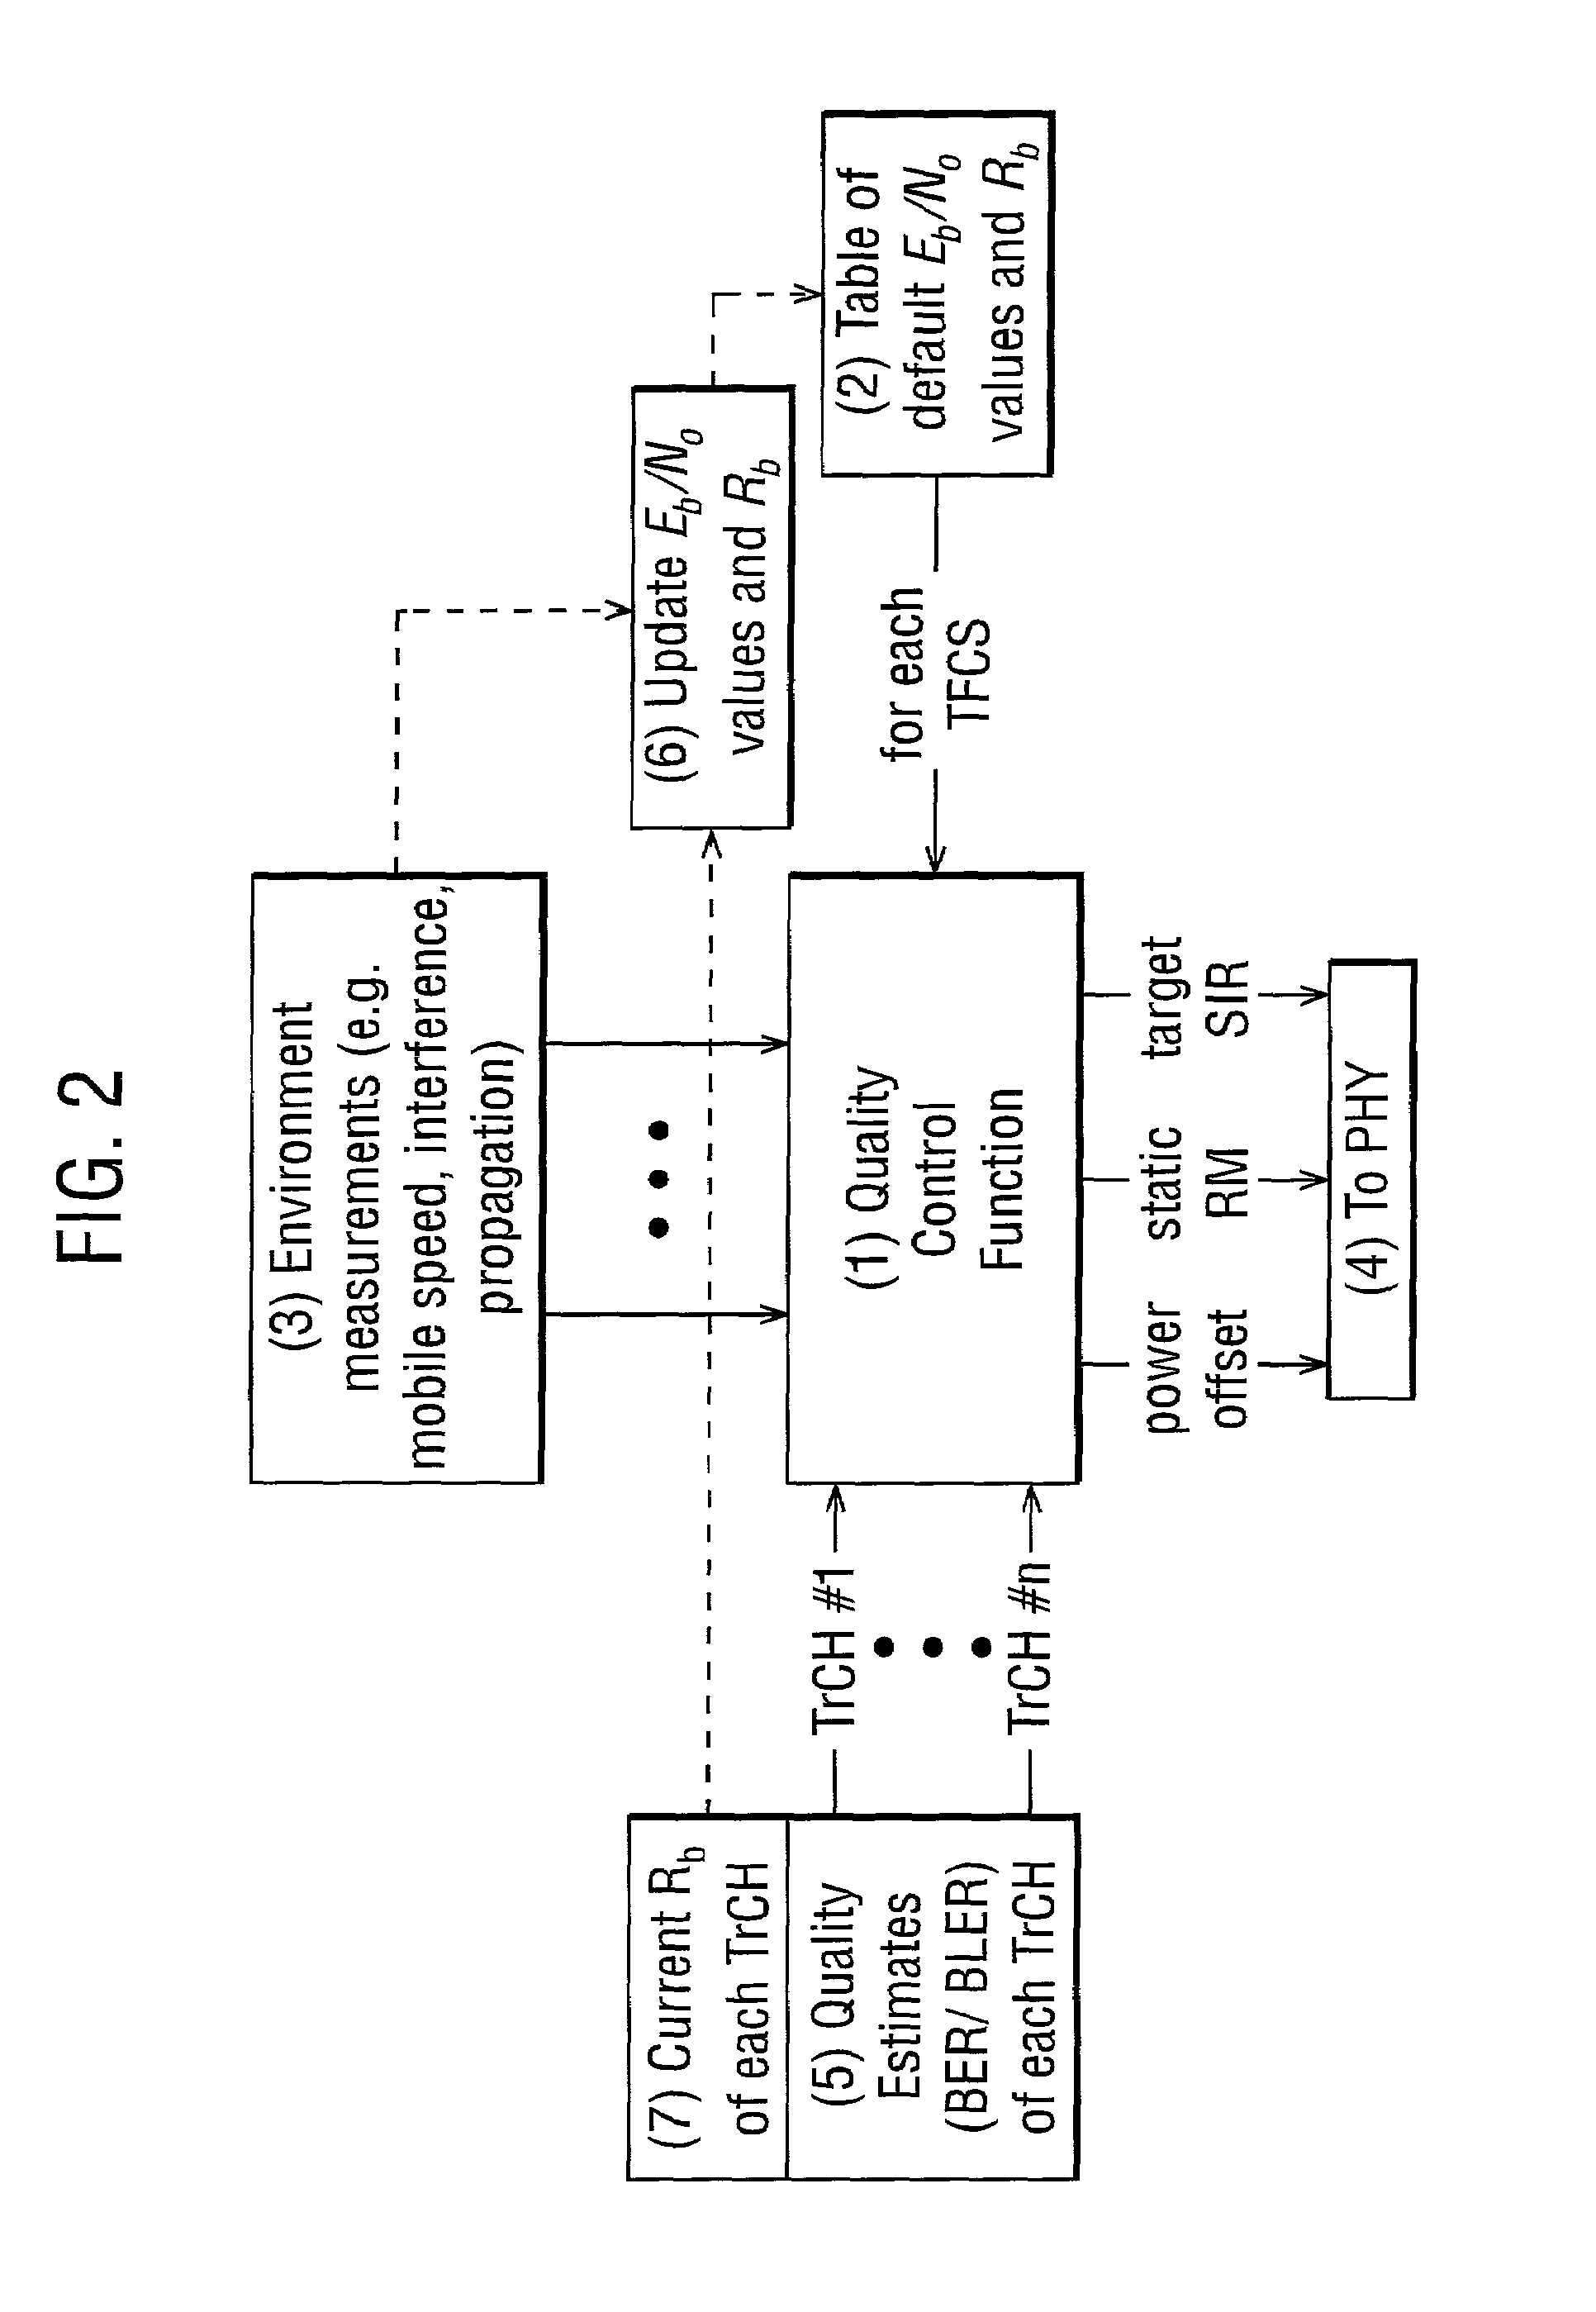 Method of controlling quality of service of CDMA system using dynamic adjustment of parameters representing transmitting properties concerning quality of service